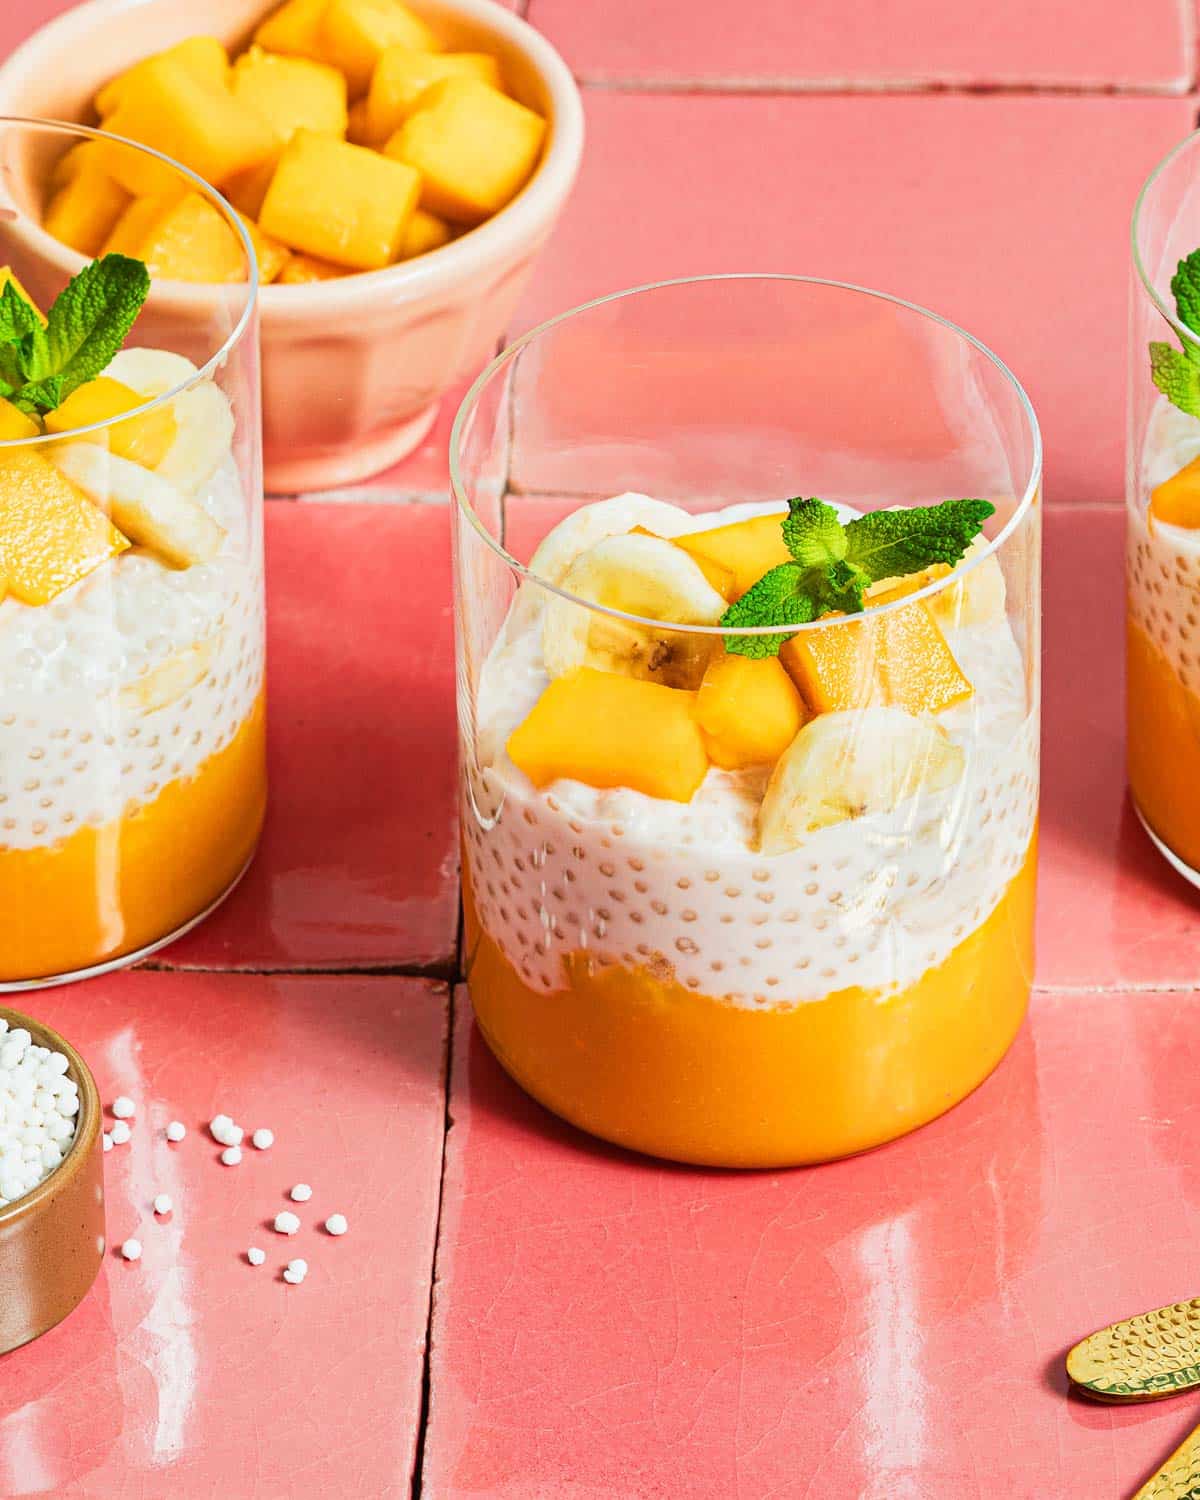 A close side shot shows sago pearls in coconut milk with mango in a glass jar.